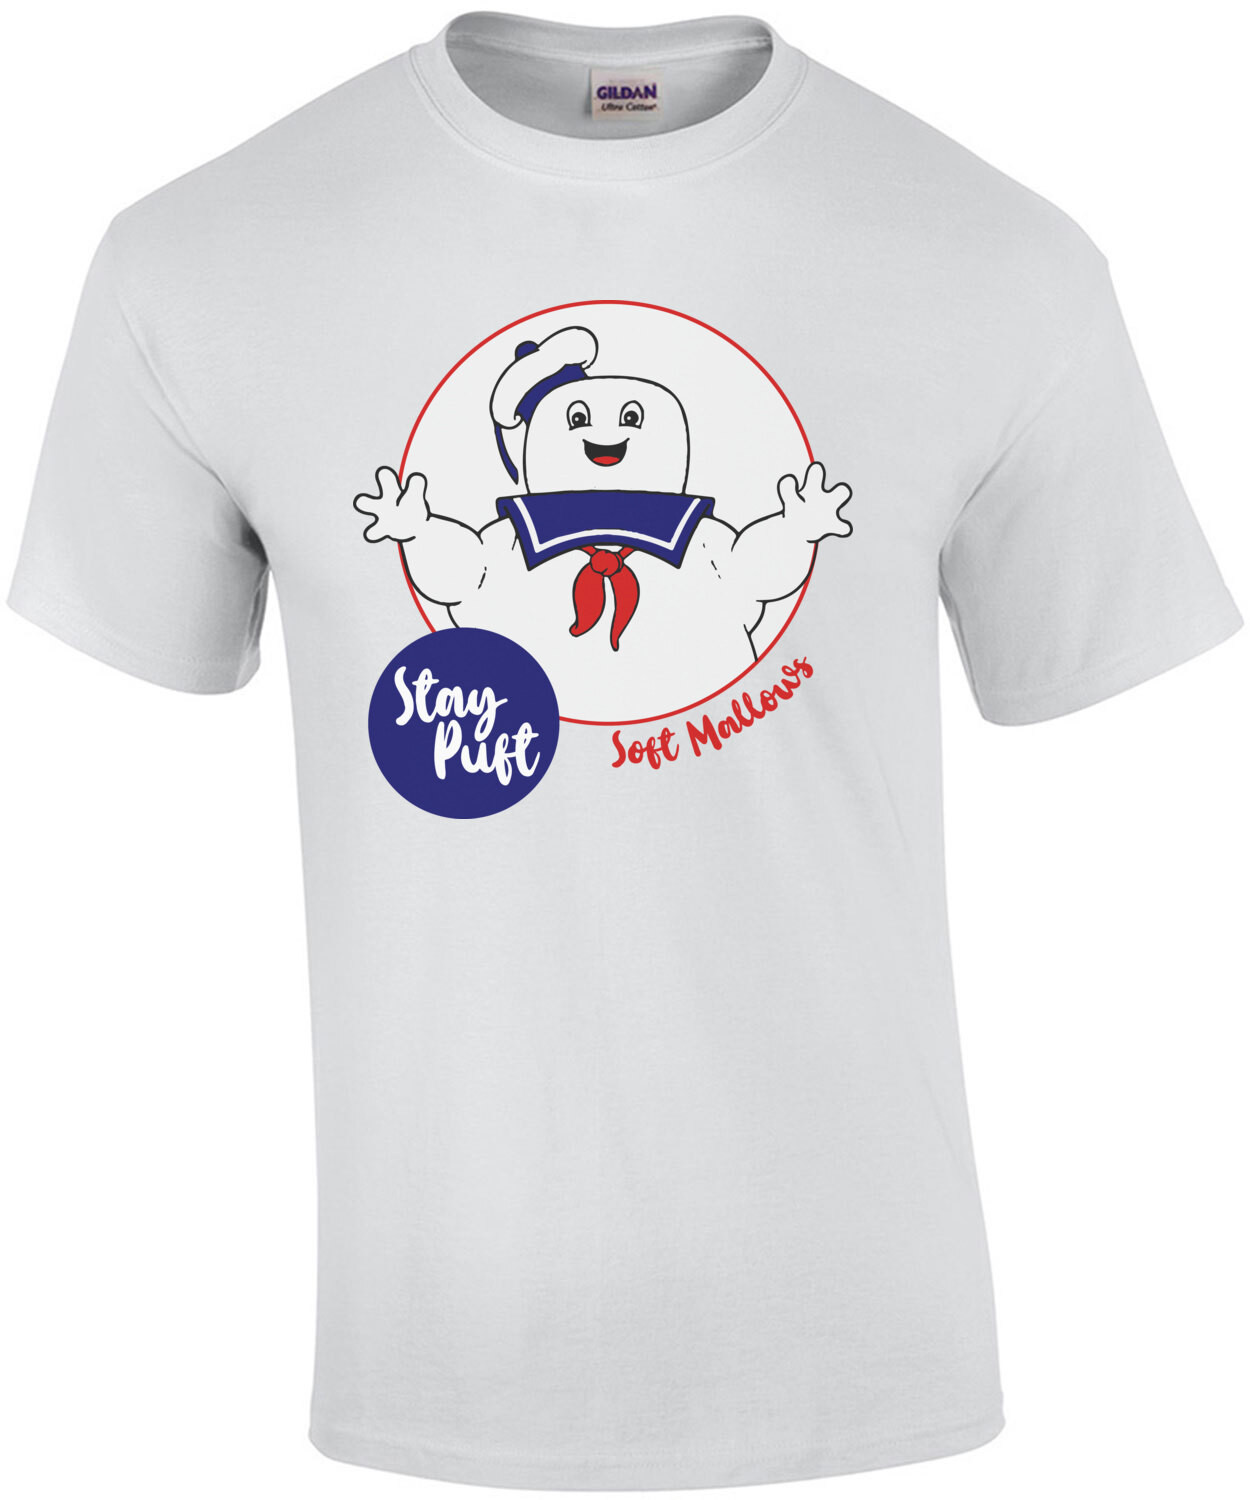 Stay Puft - Marshmallow Man - Ghostbusters T-Shirt - 80's T-Shirt